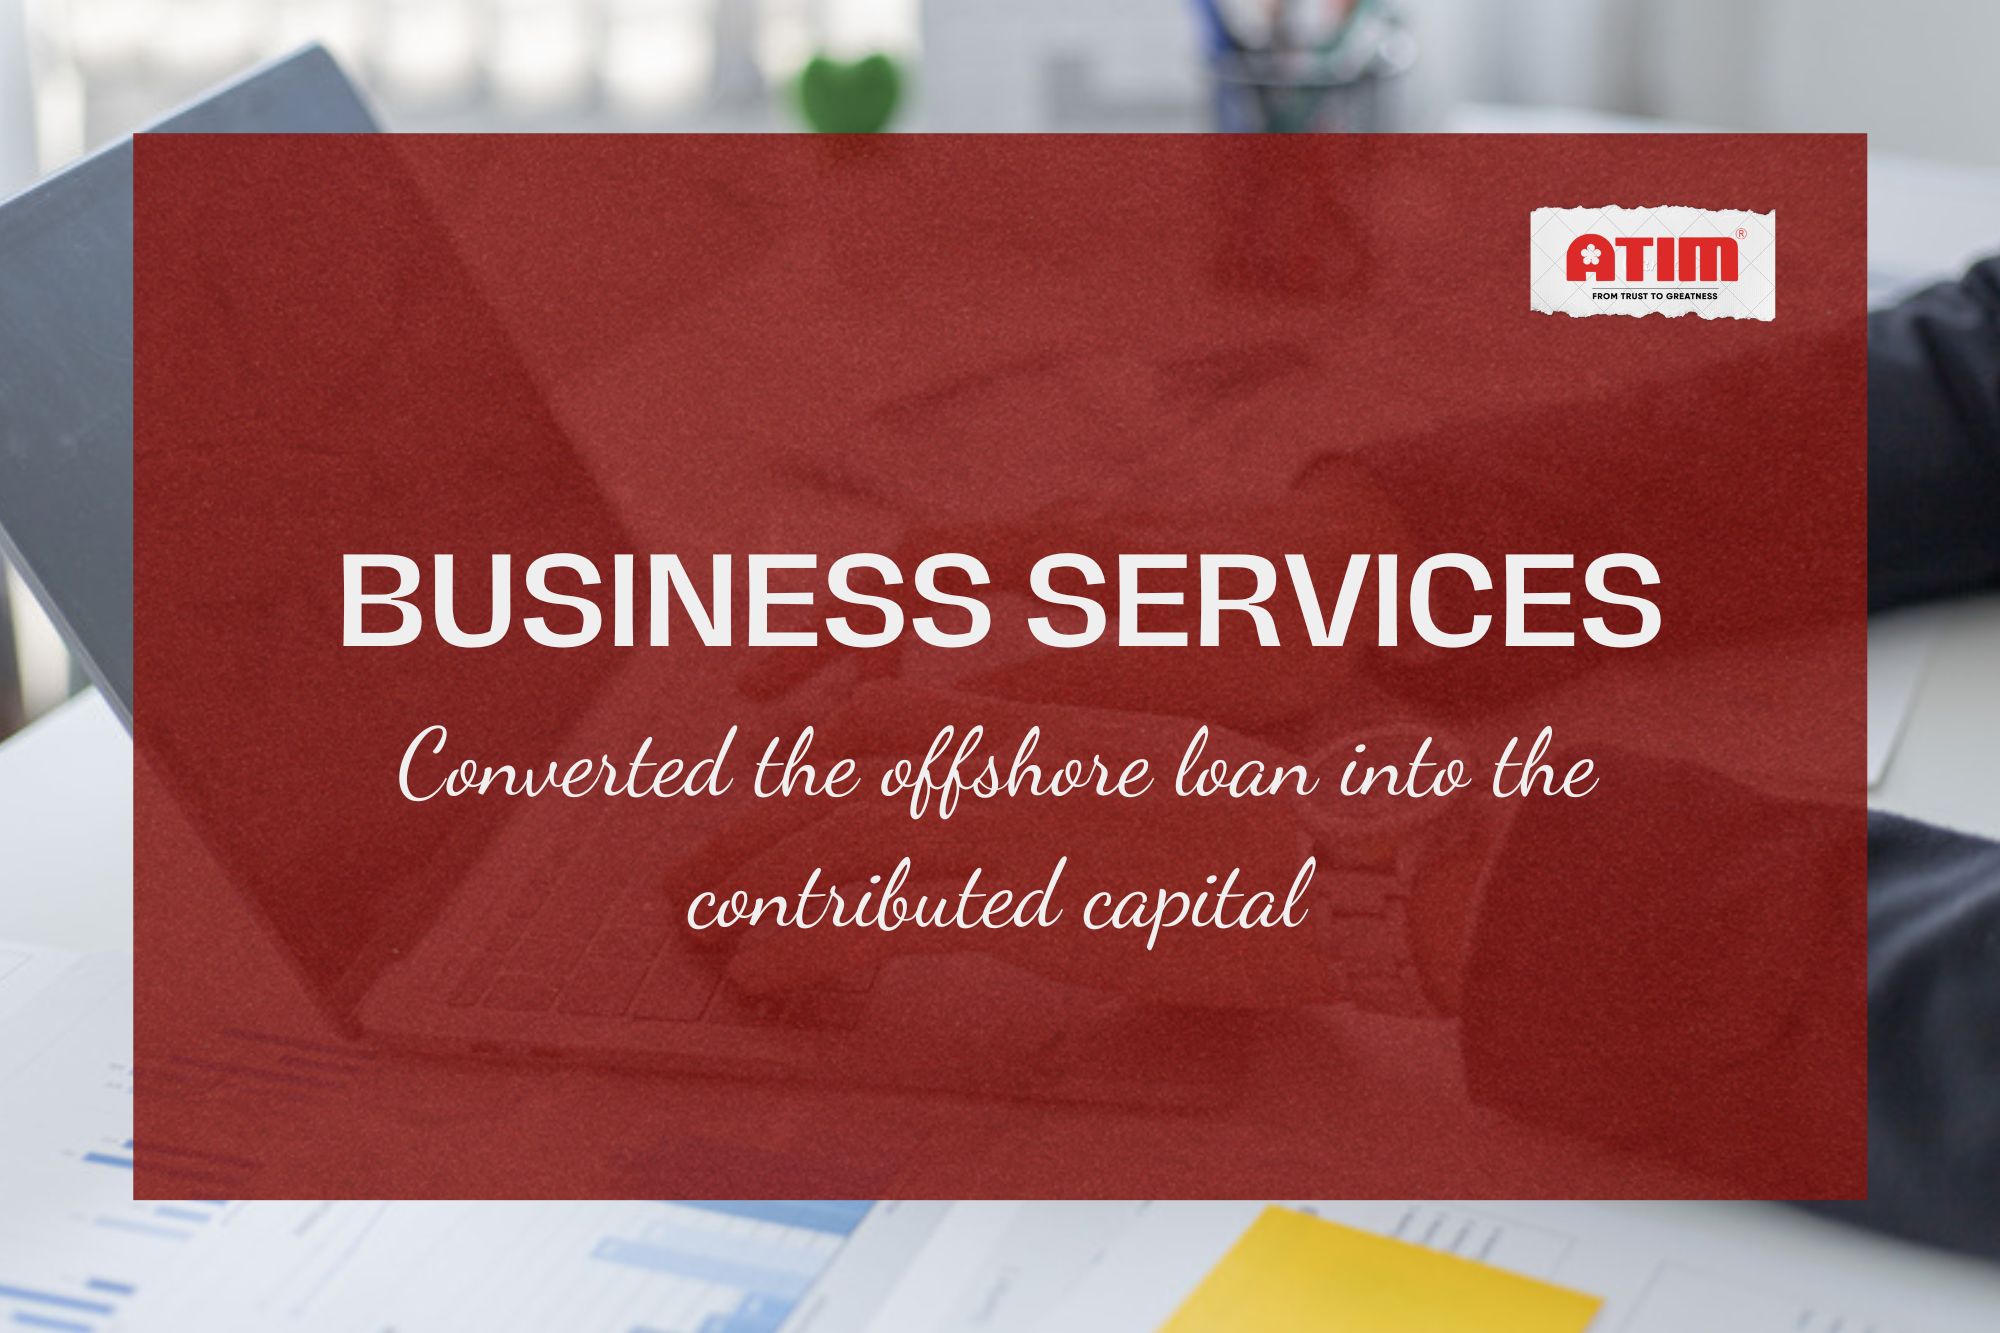 Business Service - Converted the offshore loan into the contributed capital